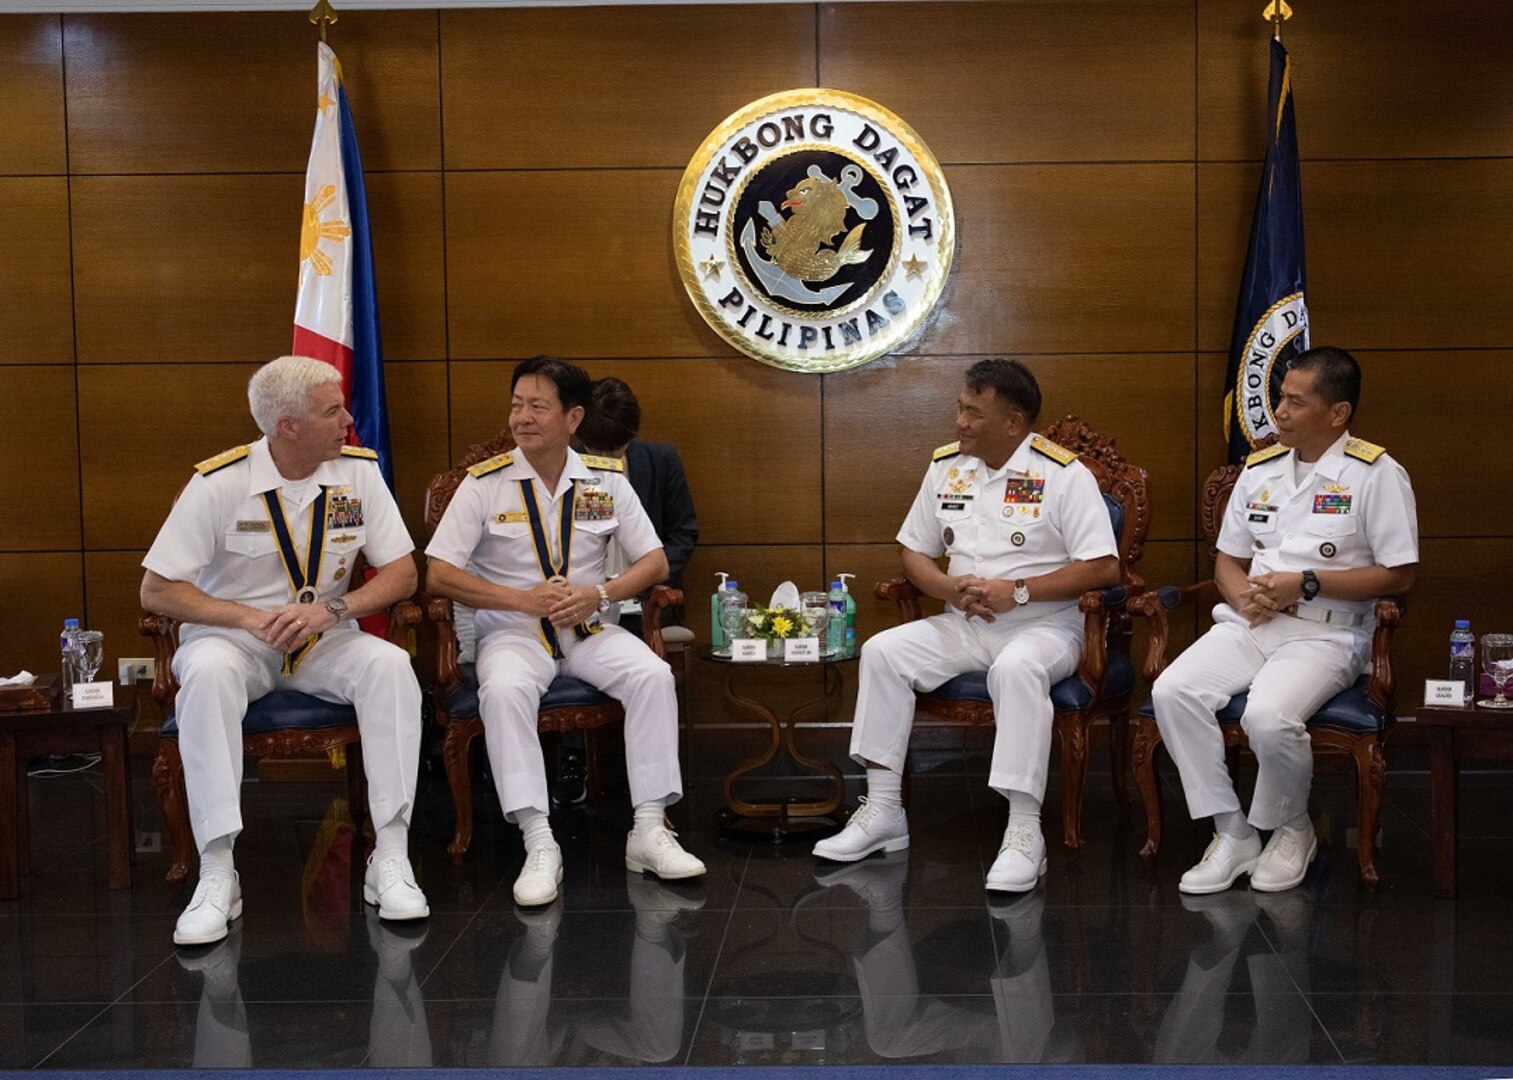 Commander U.S. 7th Fleet Vice Admiral Karl Thomas; Japan Maritime Self-Defense Force Commander-in-Chief Self-Defense Fleet Vice Adm. SAITO Akira; Philippine Navy Flag Officer in Command Vice Adm. Toribio Adaci; and Philippine Fleet Commander Rear Adm. Renato David conduct staff talks in Manila, Philippines, Aug. 27. U.S. 7th Fleet is the U.S. Navy’s largest forward-deployed numbered fleet, and routinely interacts and operates with allies and partners to preserve a free and open Indo-Pacific.